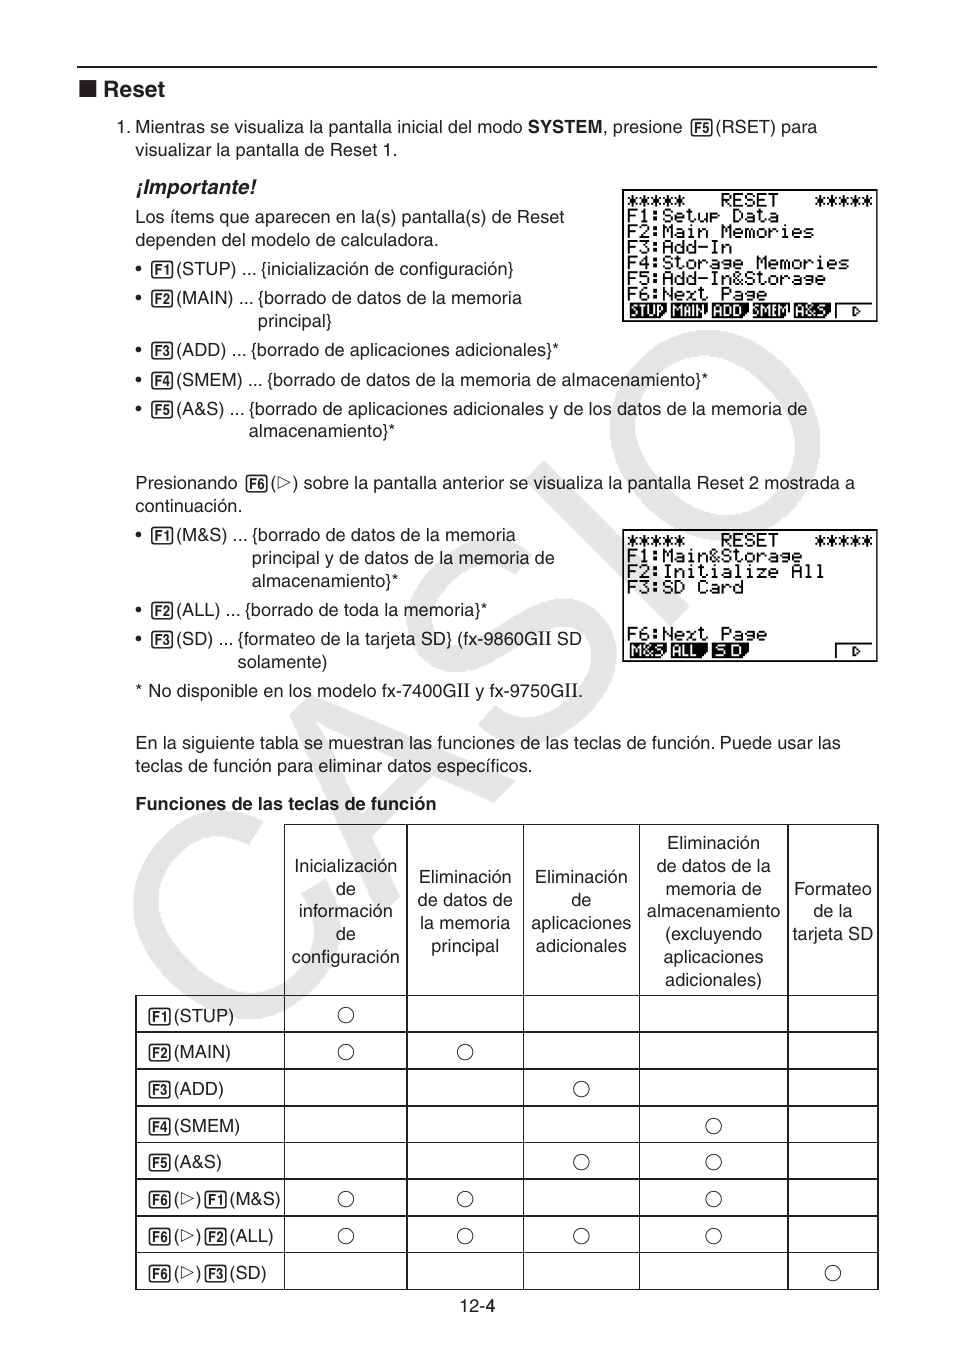 I reset | Casio FX-9750GII User Manual | Page 310 / 411